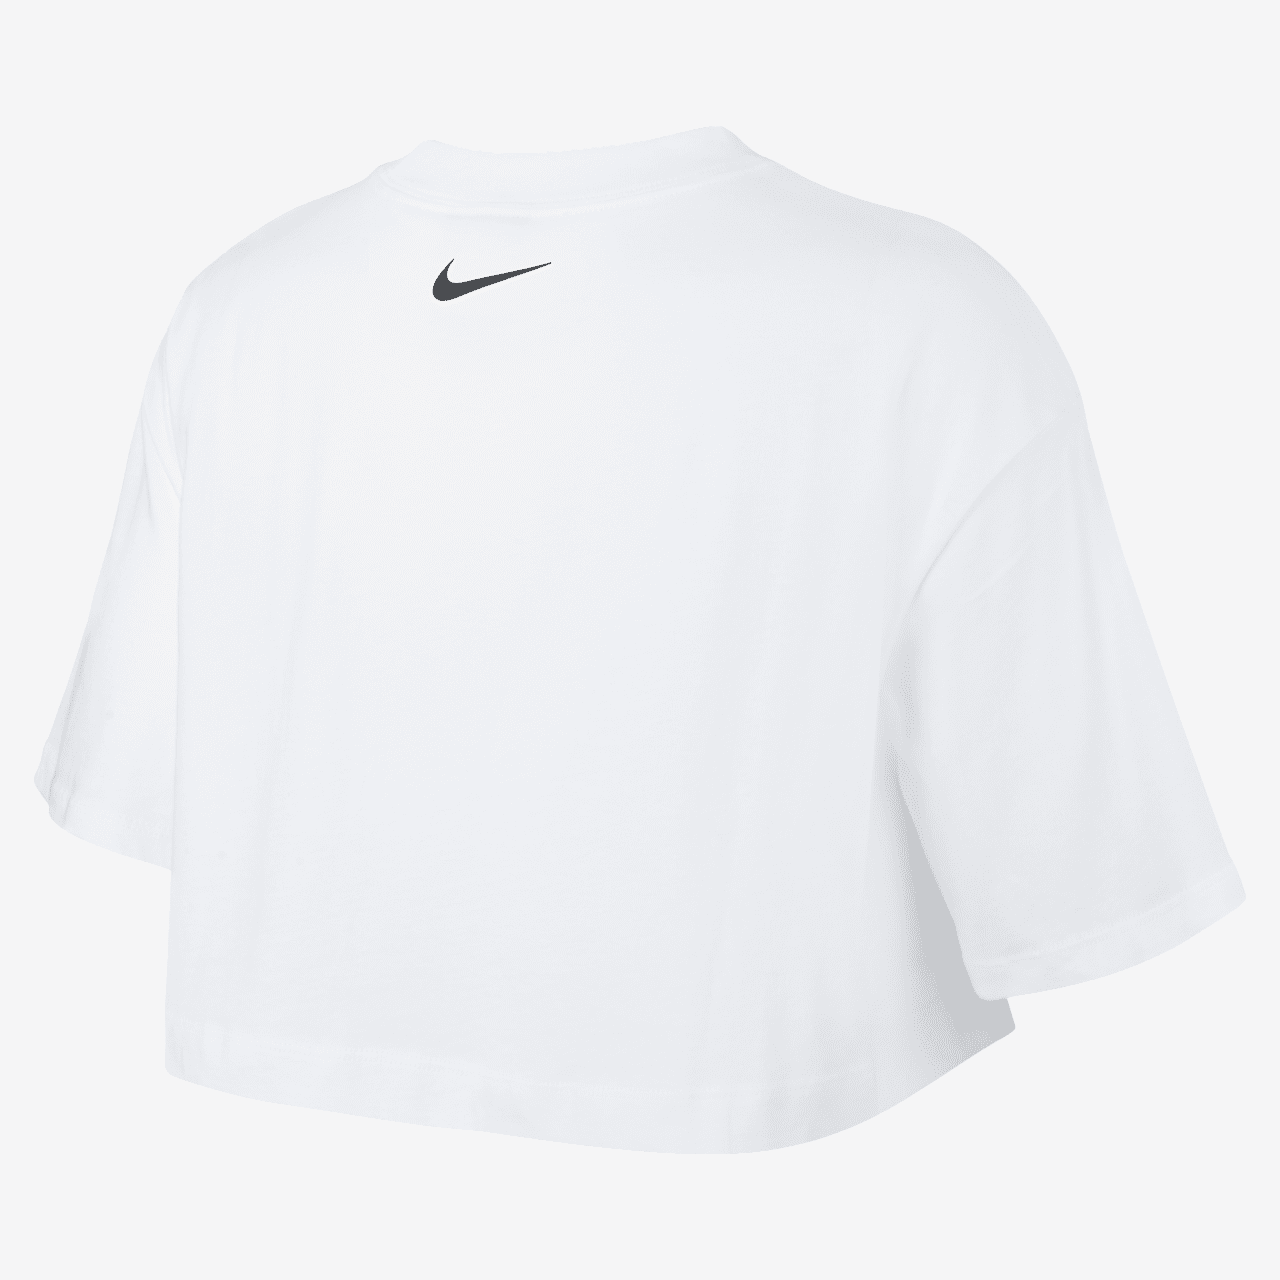 white and black nike crop top